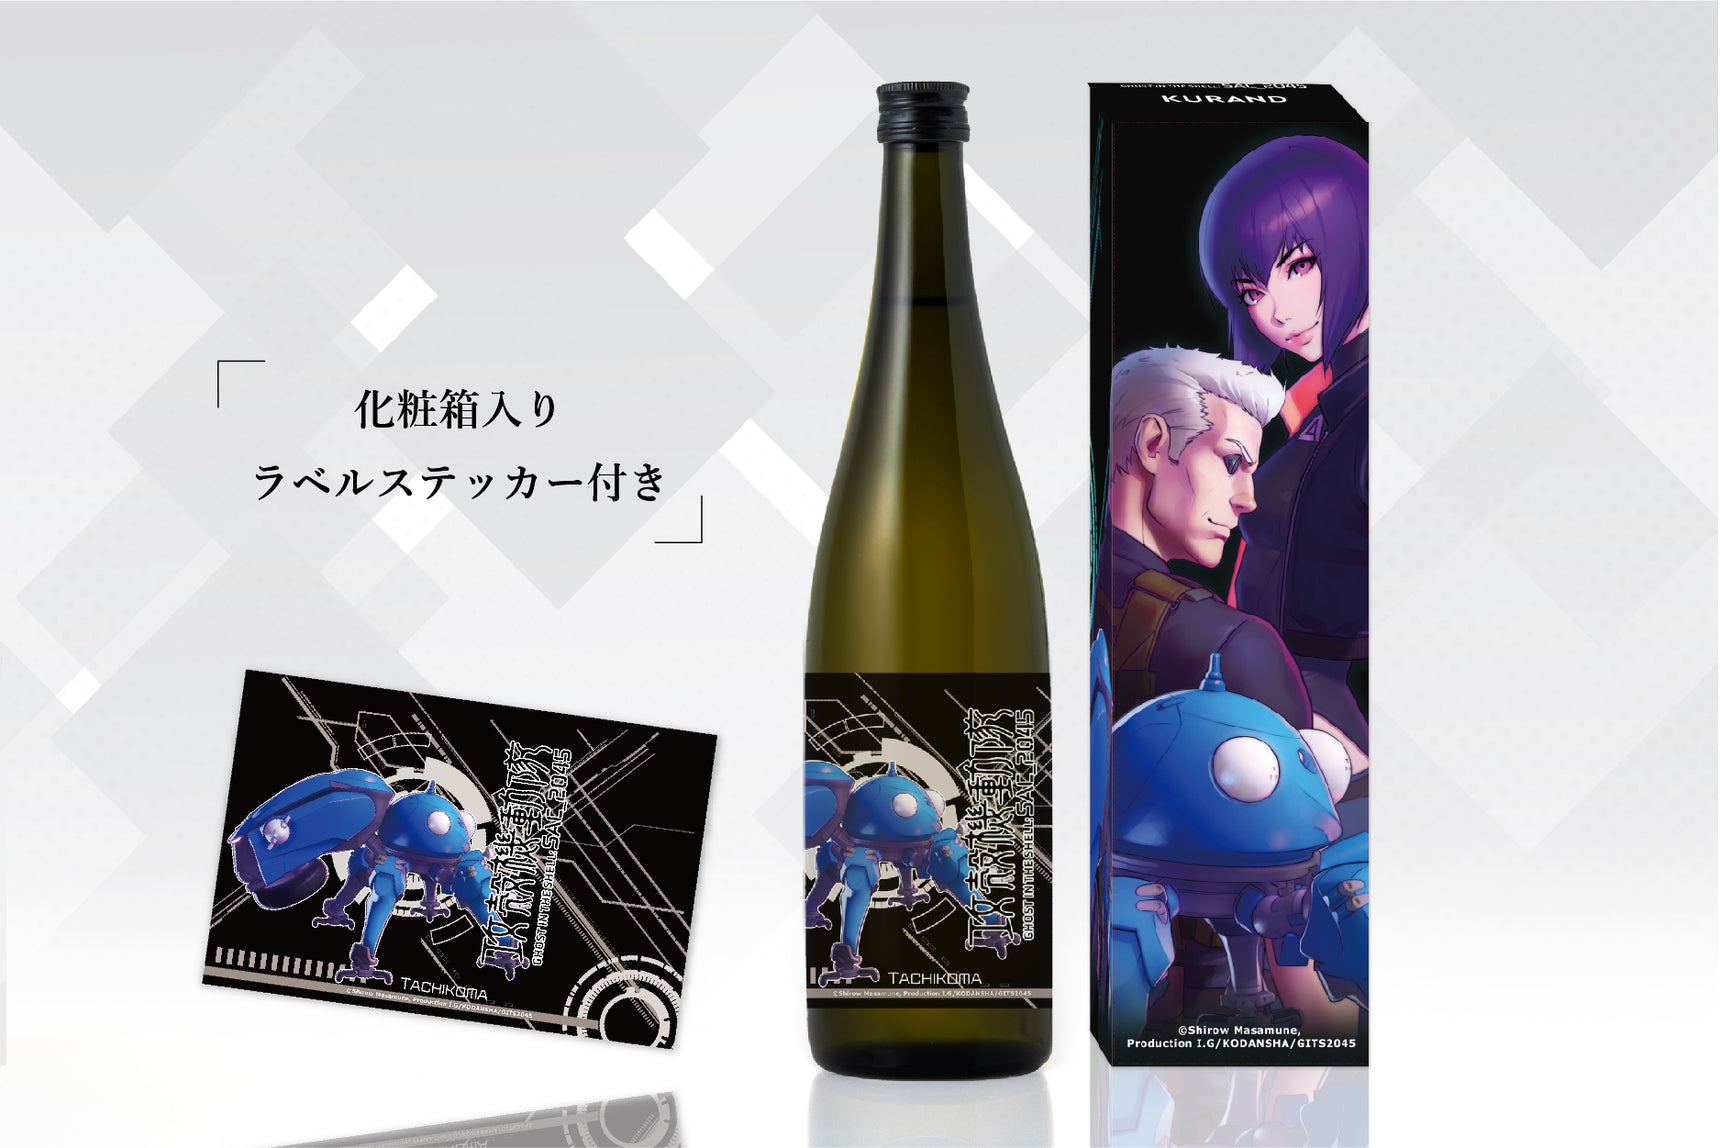 GHOST IN THE SHELL: SAC_2045 - タチコマver. -